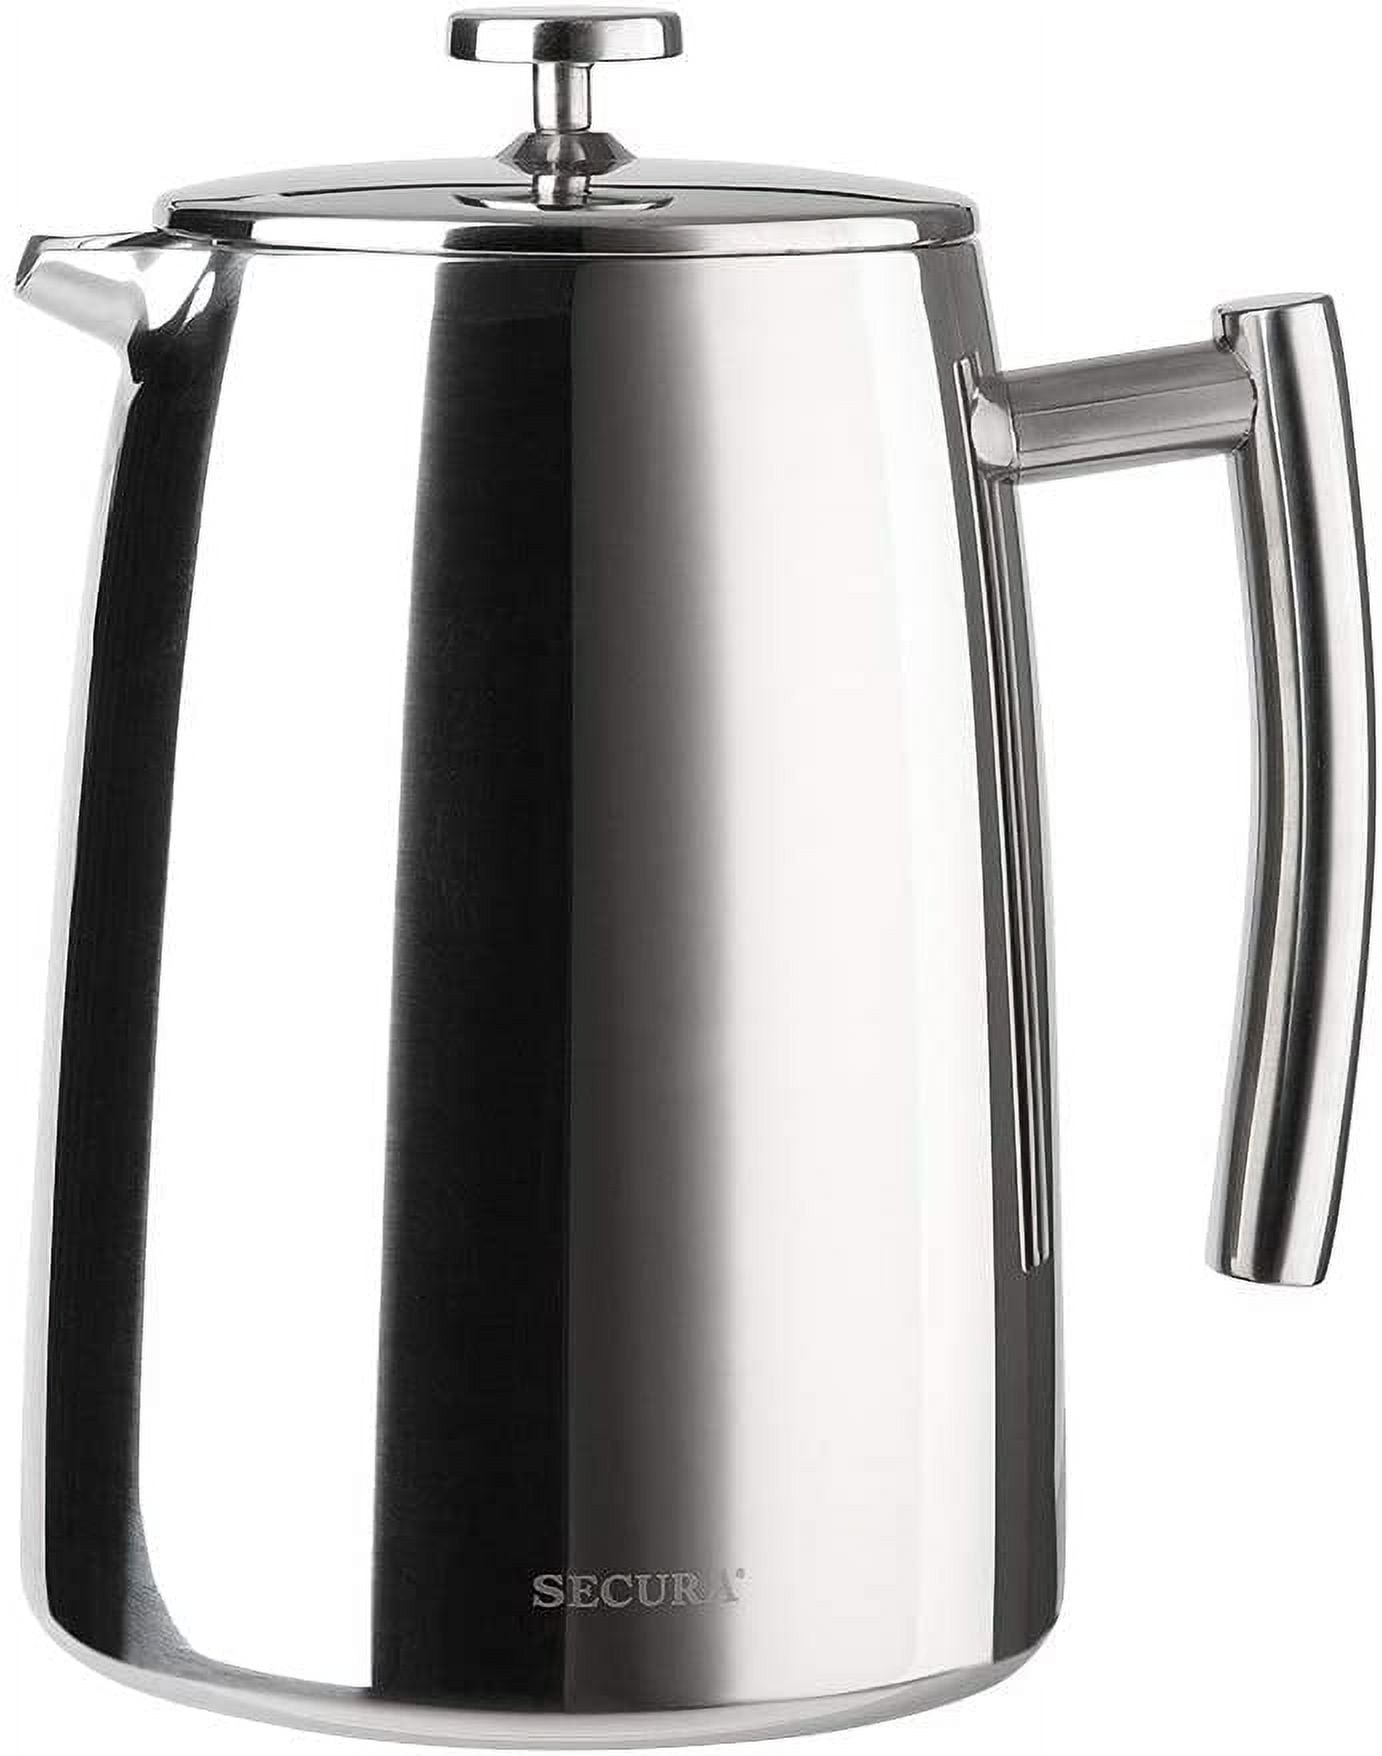 Secura French Press Coffee Maker, 50-Ounce, 18/10 Stainless Steel